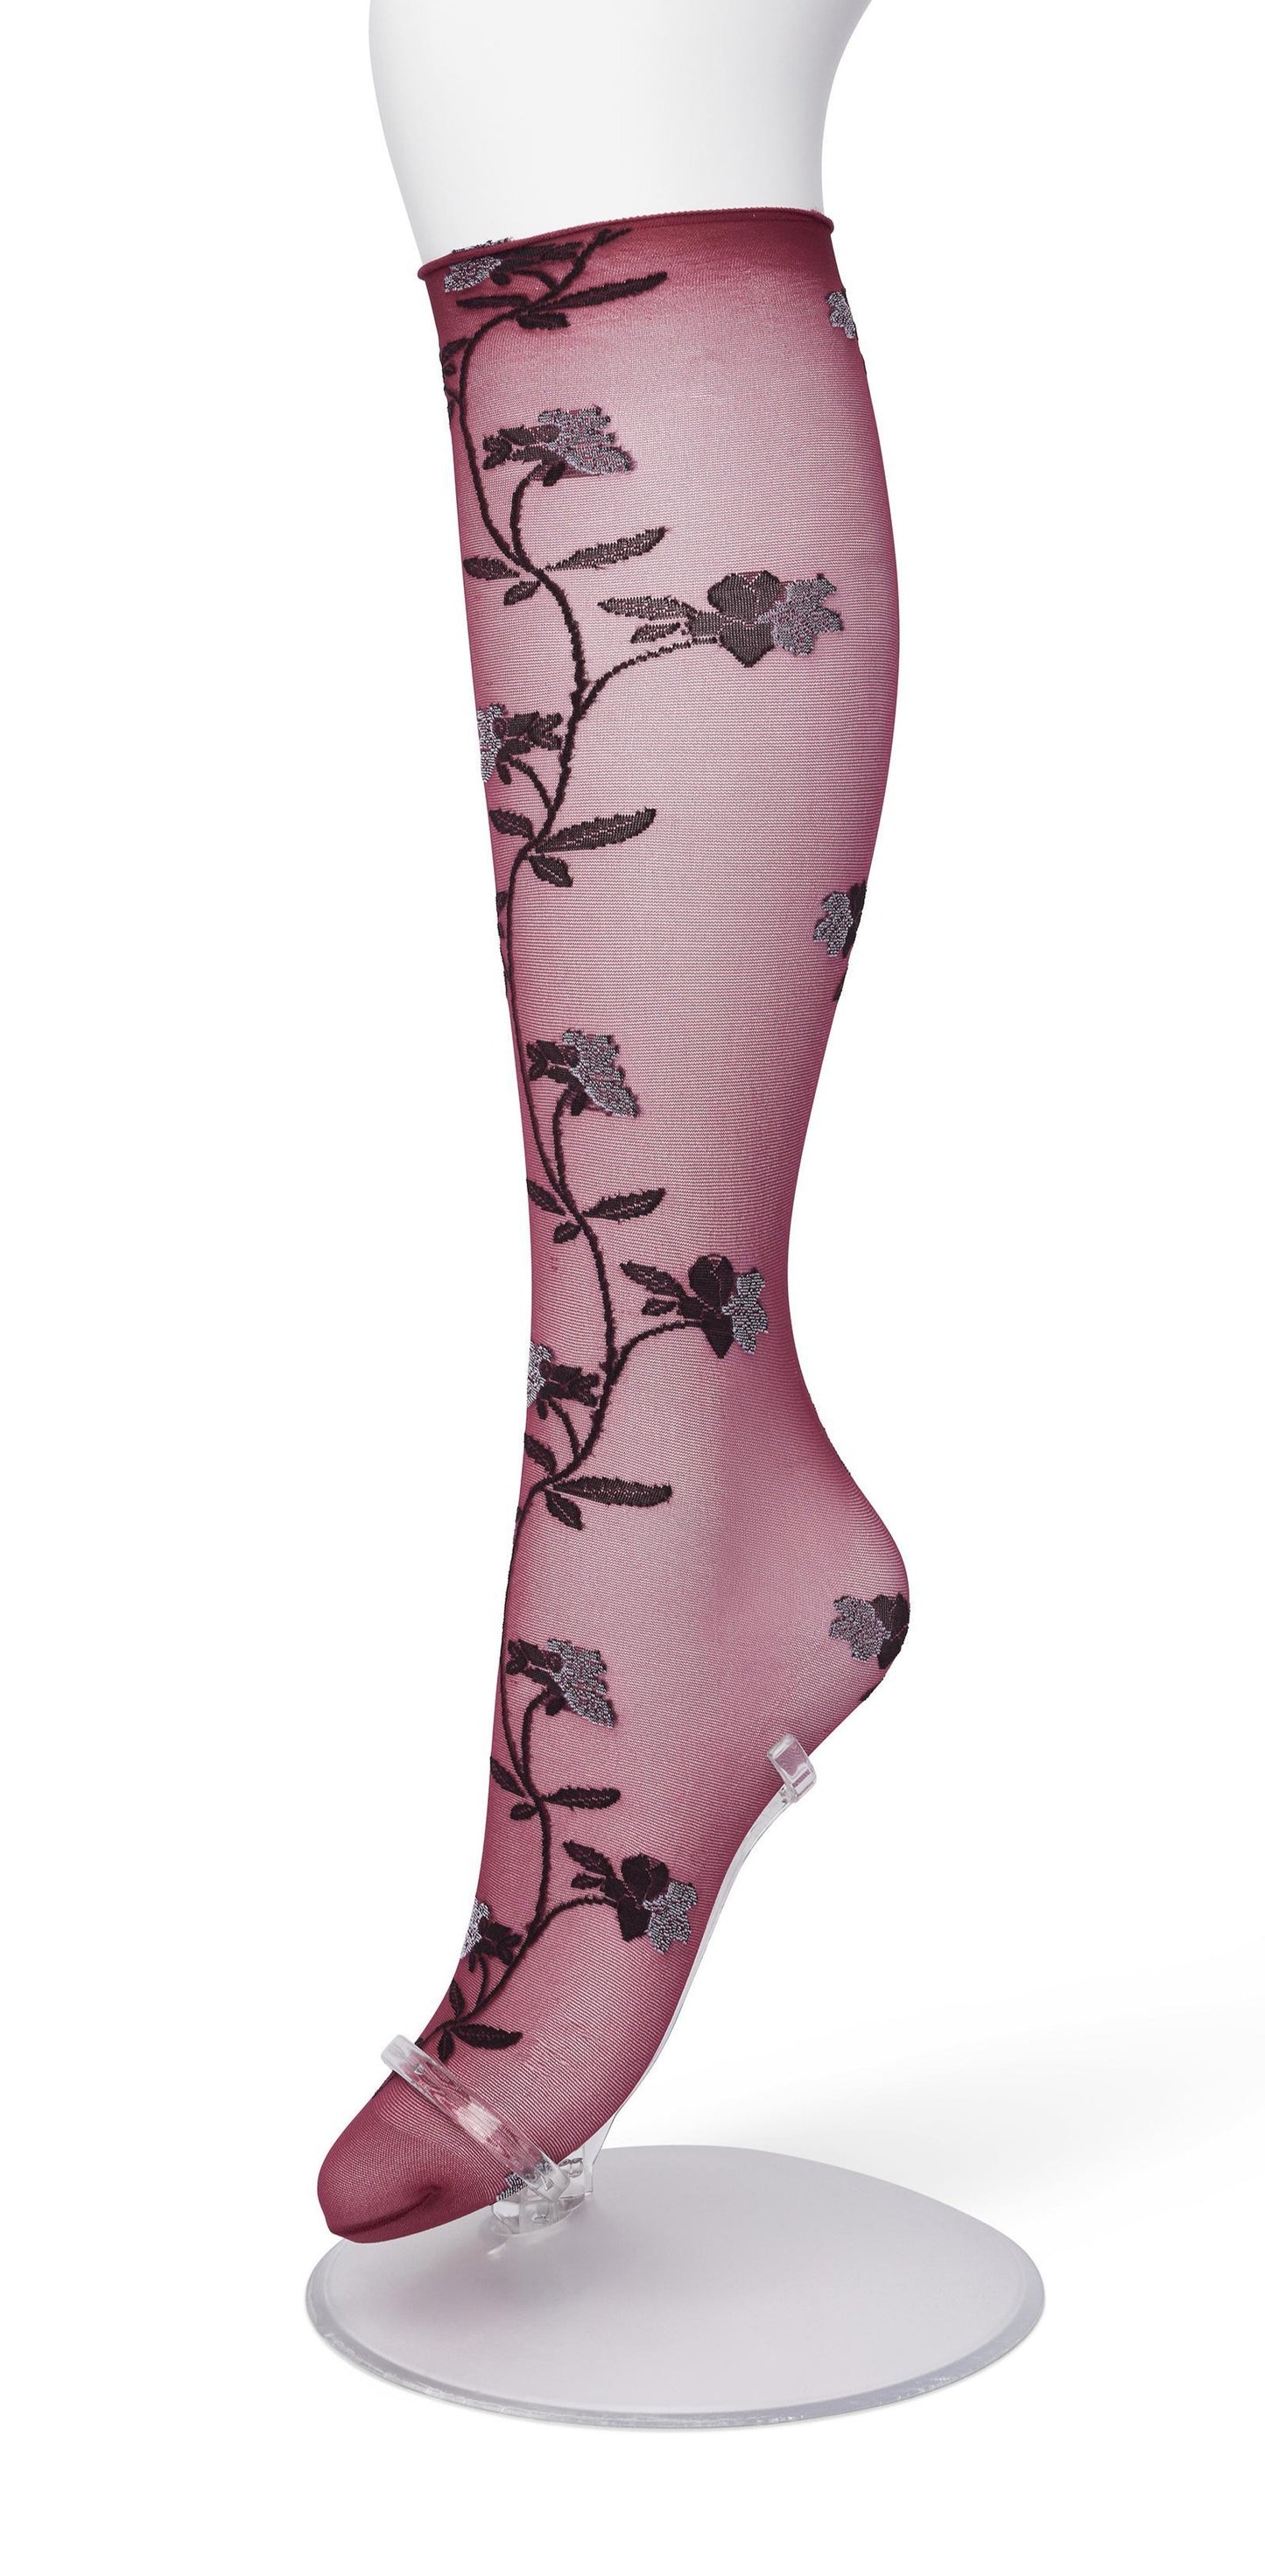 Bonnie Doon BP211510 Misty Flower Knee-high Rhododendron - Sheer red wine fashion knee-high socks with a woven floral vine style pattern in black and white and deep black comfort cuff with a scalloped edge.